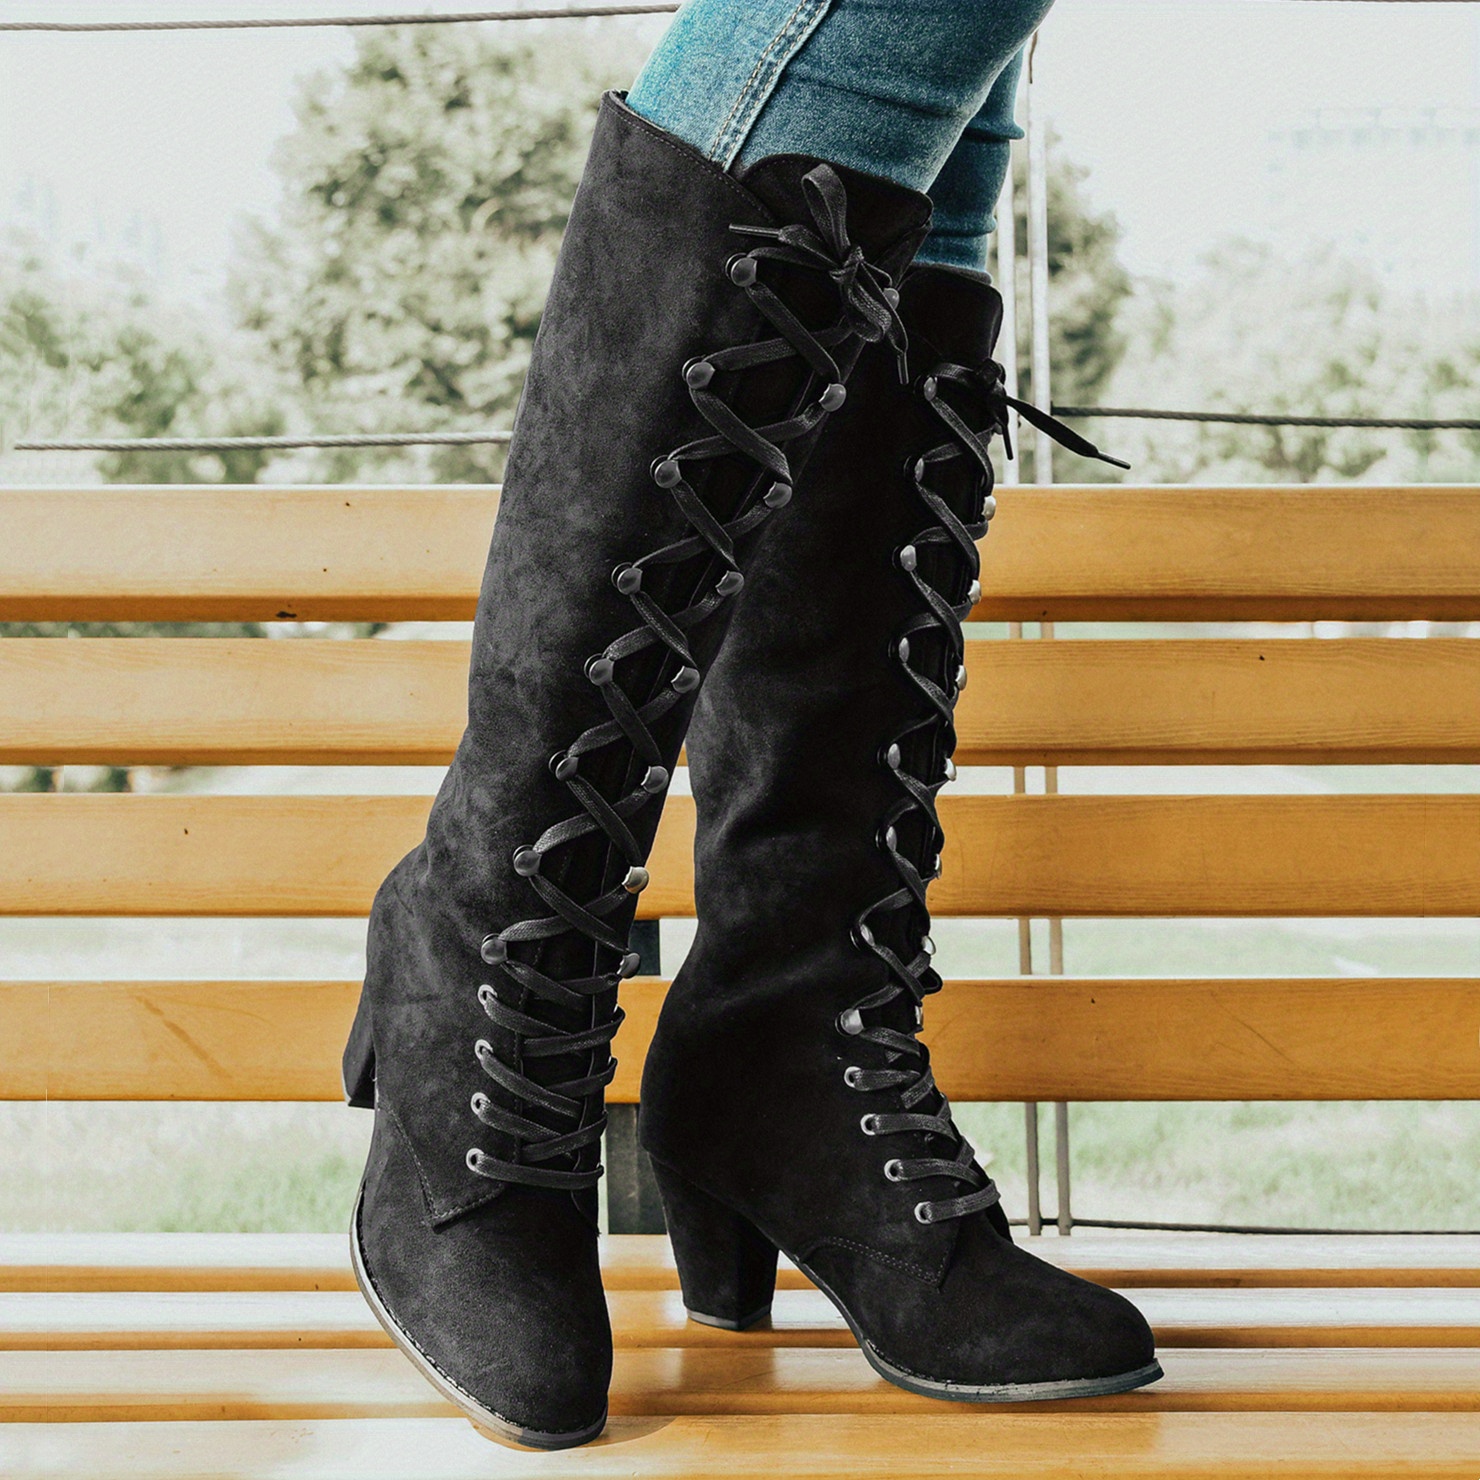 LACE UP BOOTS